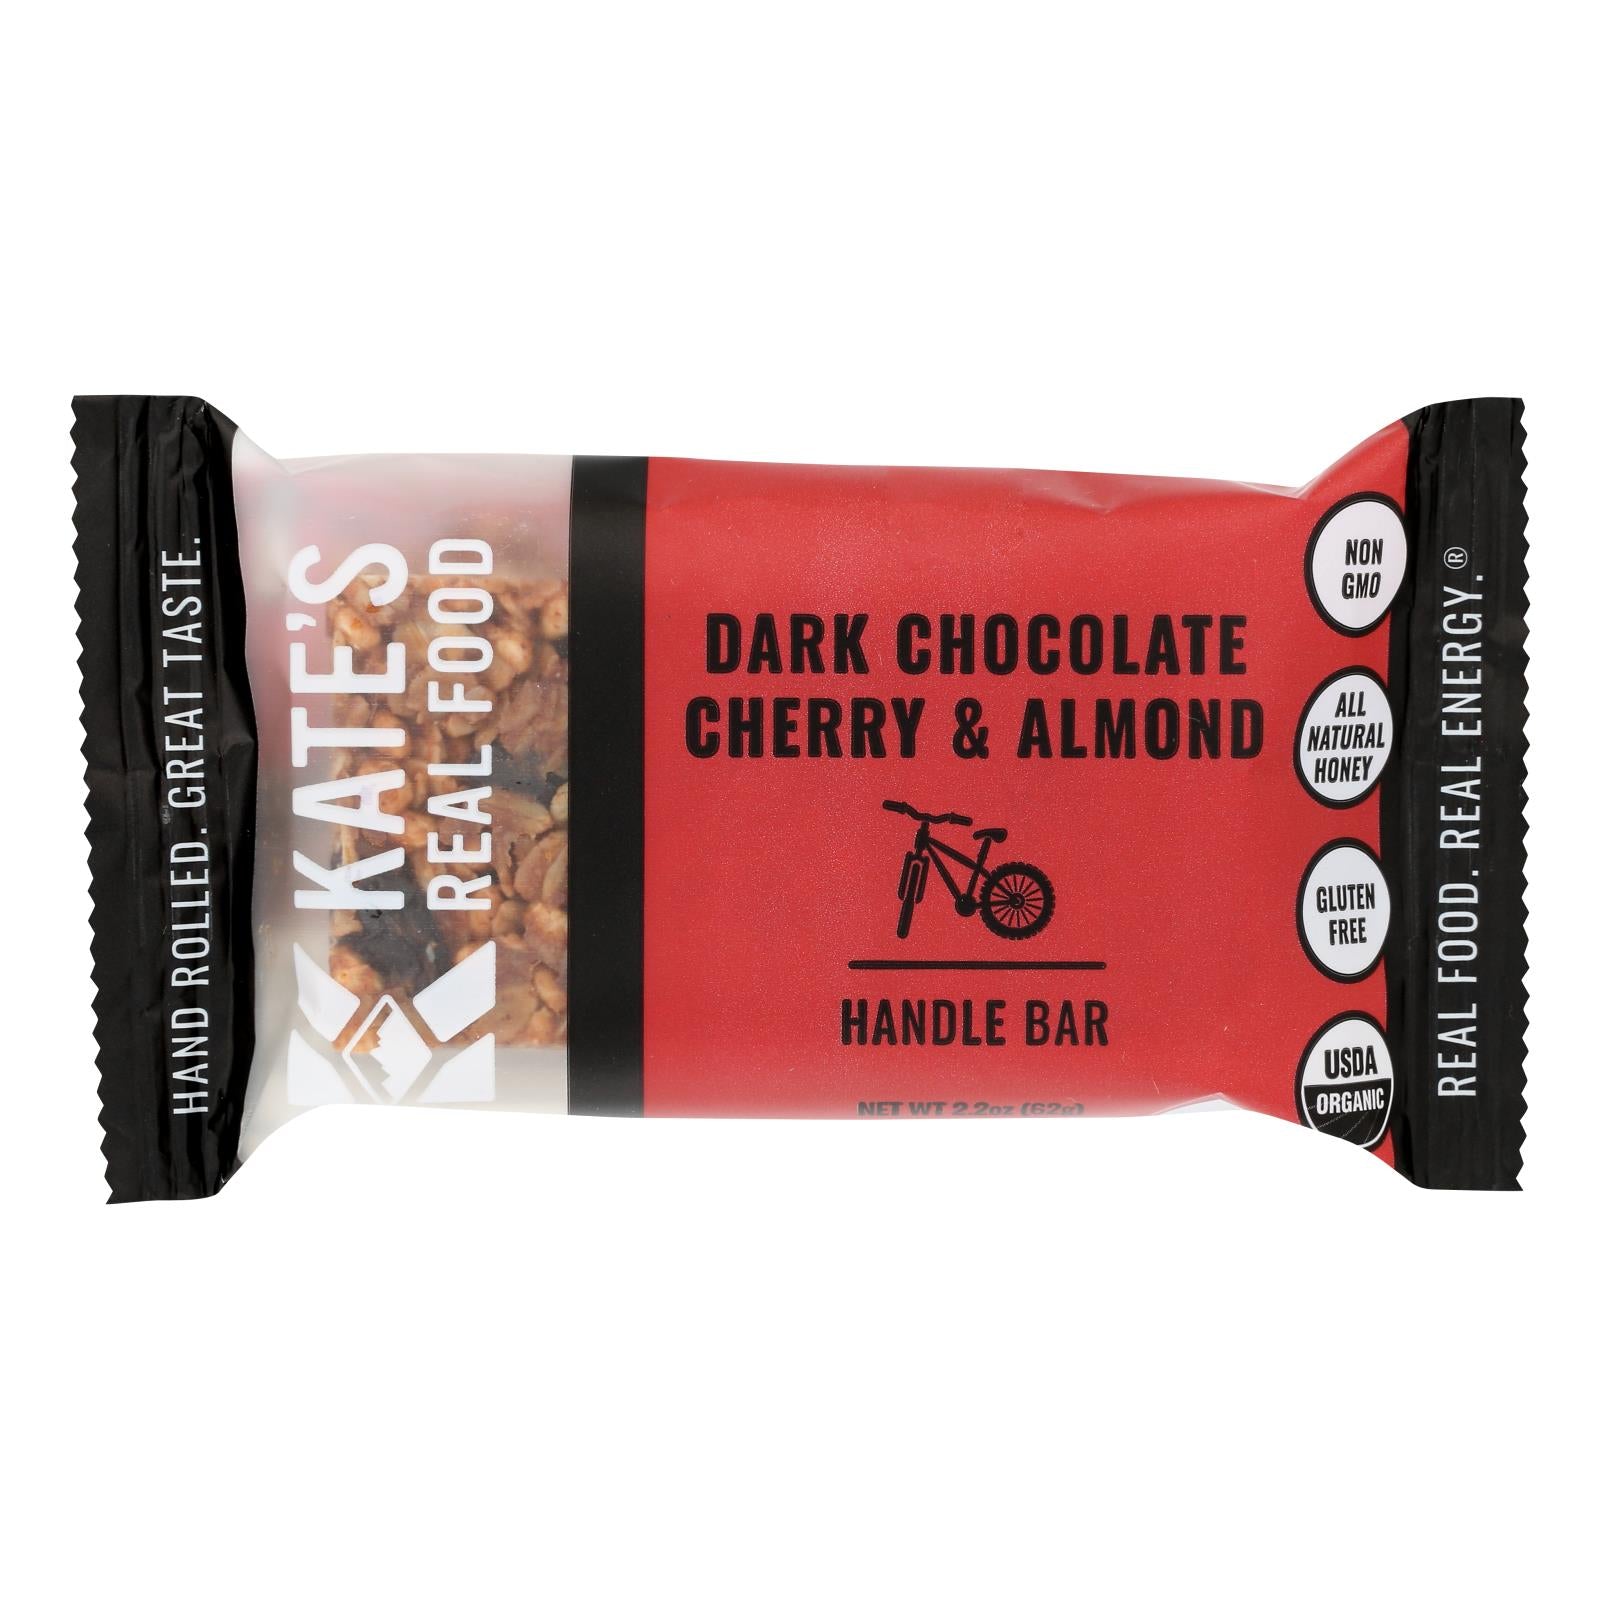 Kate'S Real Food, Kate's Real Food - Bar Hndl Dark Chy Almond - Case of 12 - 2.2 OZ (Pack of 12)